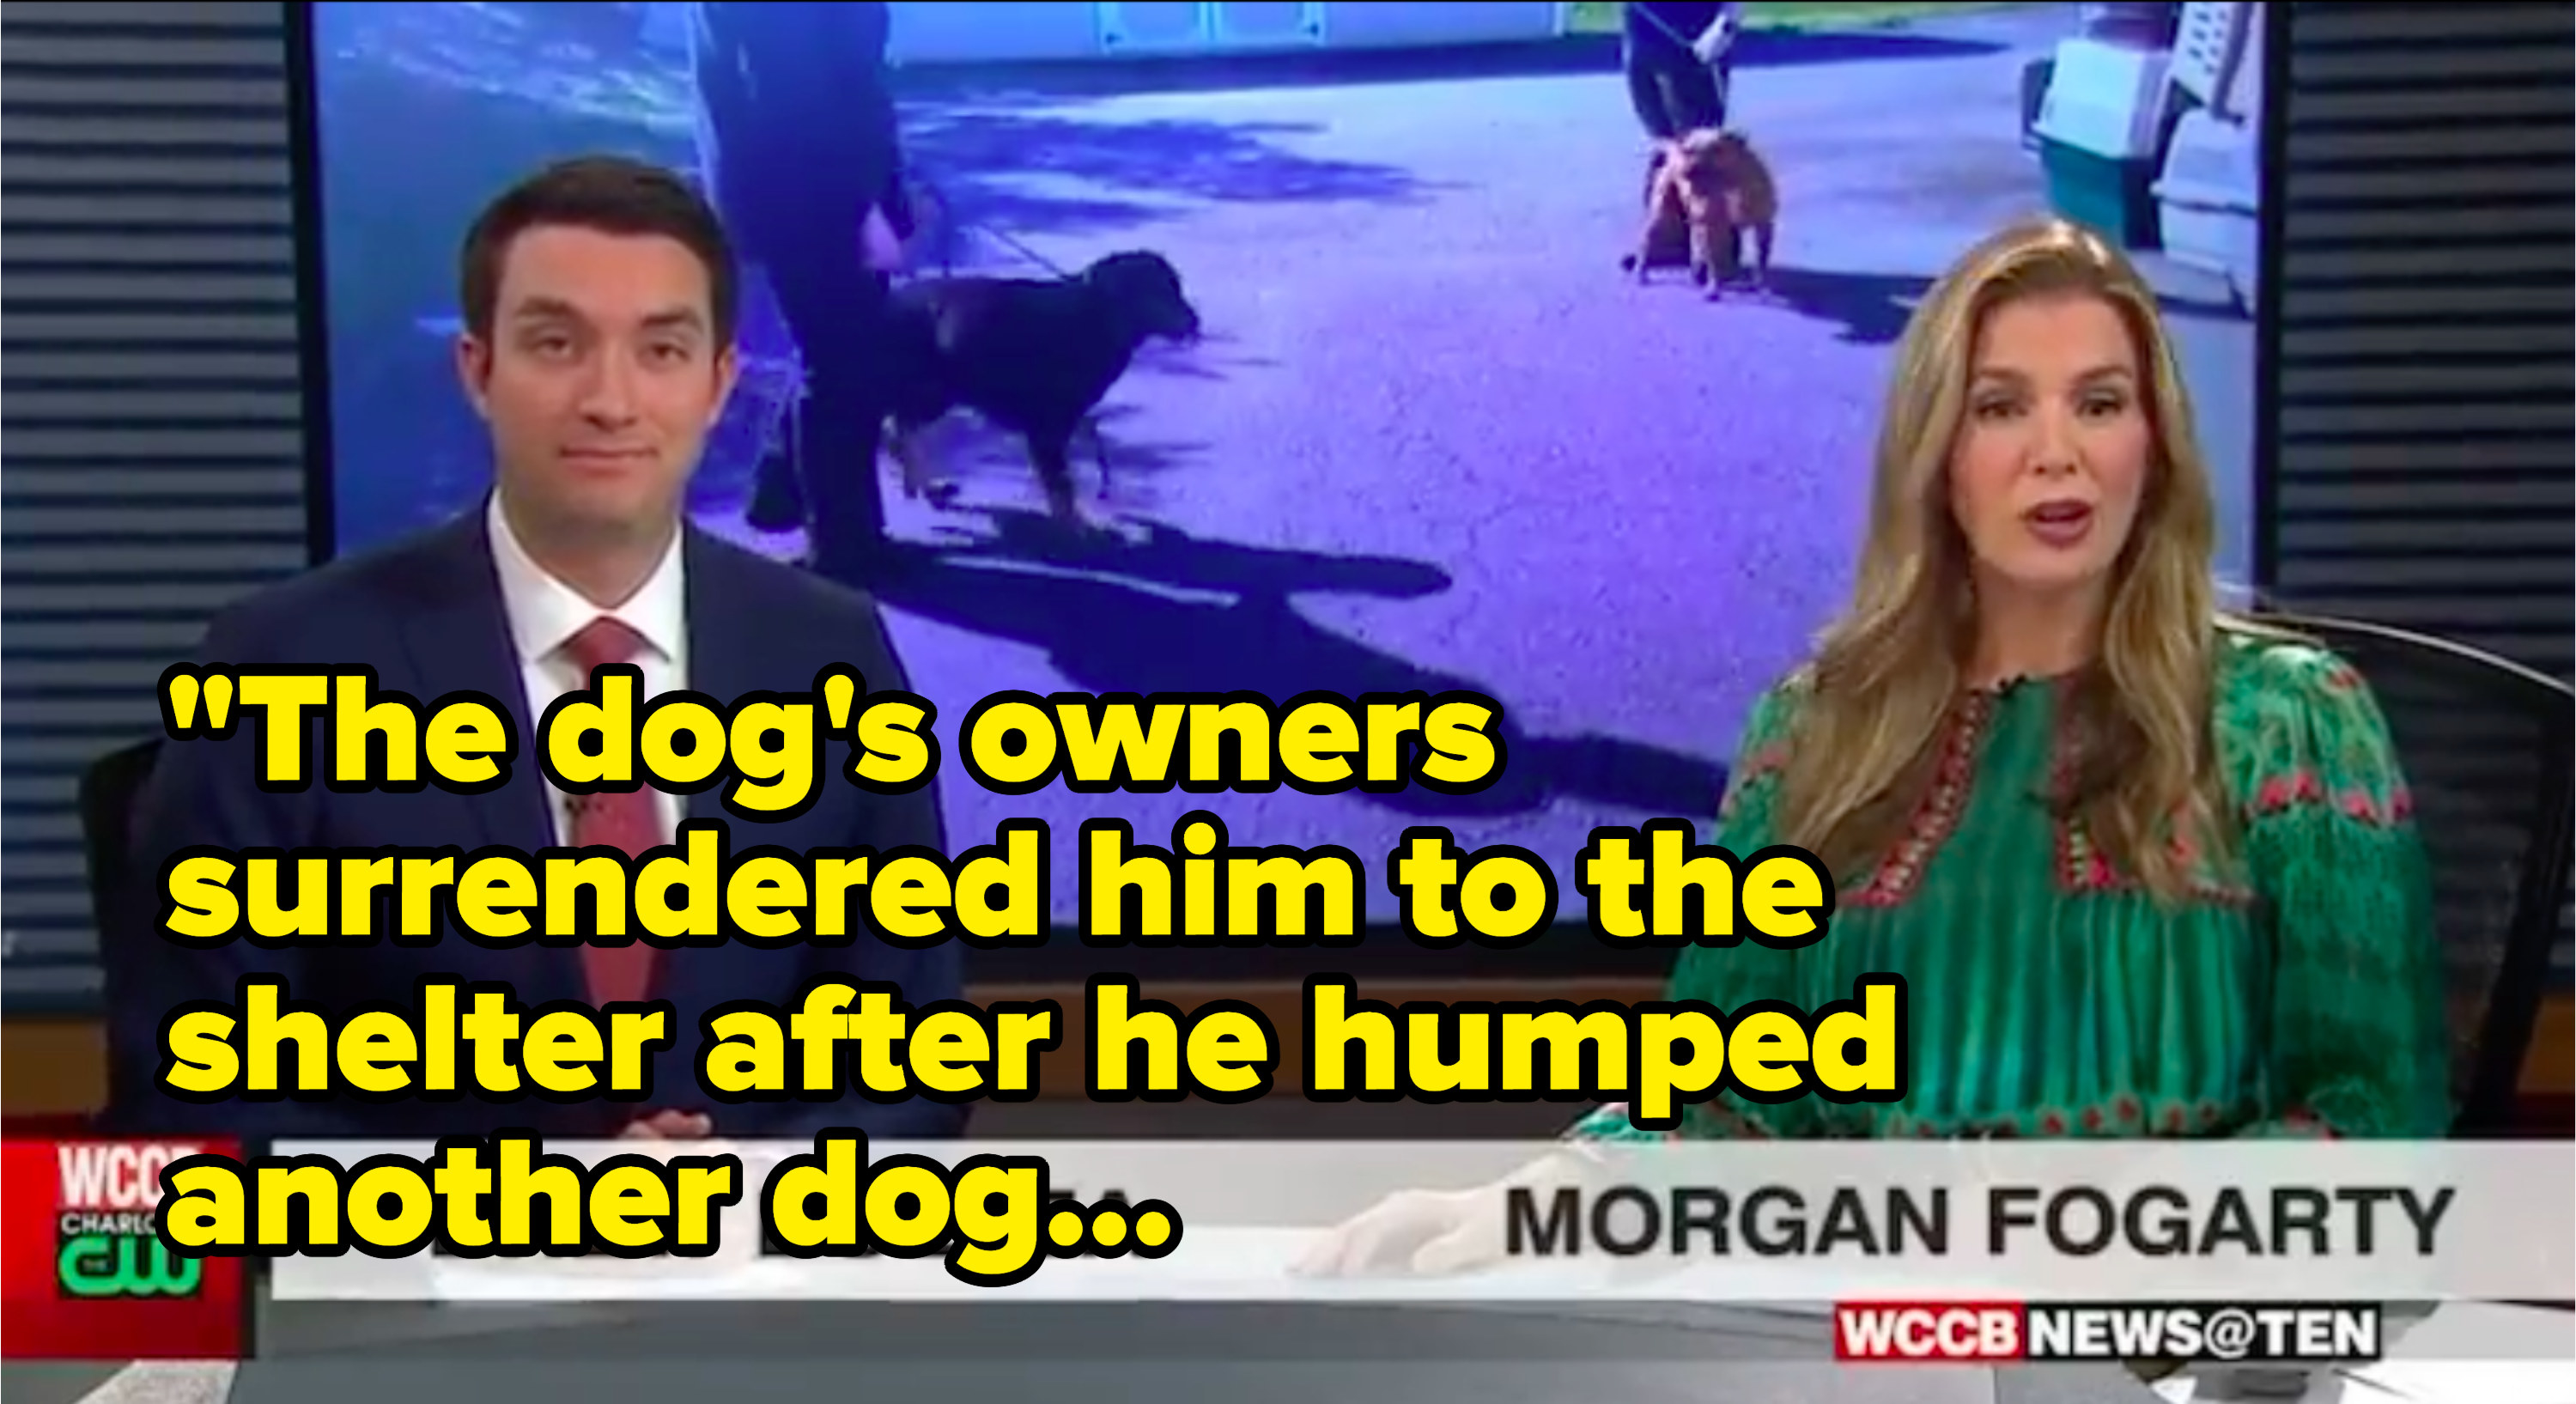 Quote from newscaster: &quot;The dog&#x27;s owners surrendered him to the shelter after he humped another dog&quot;